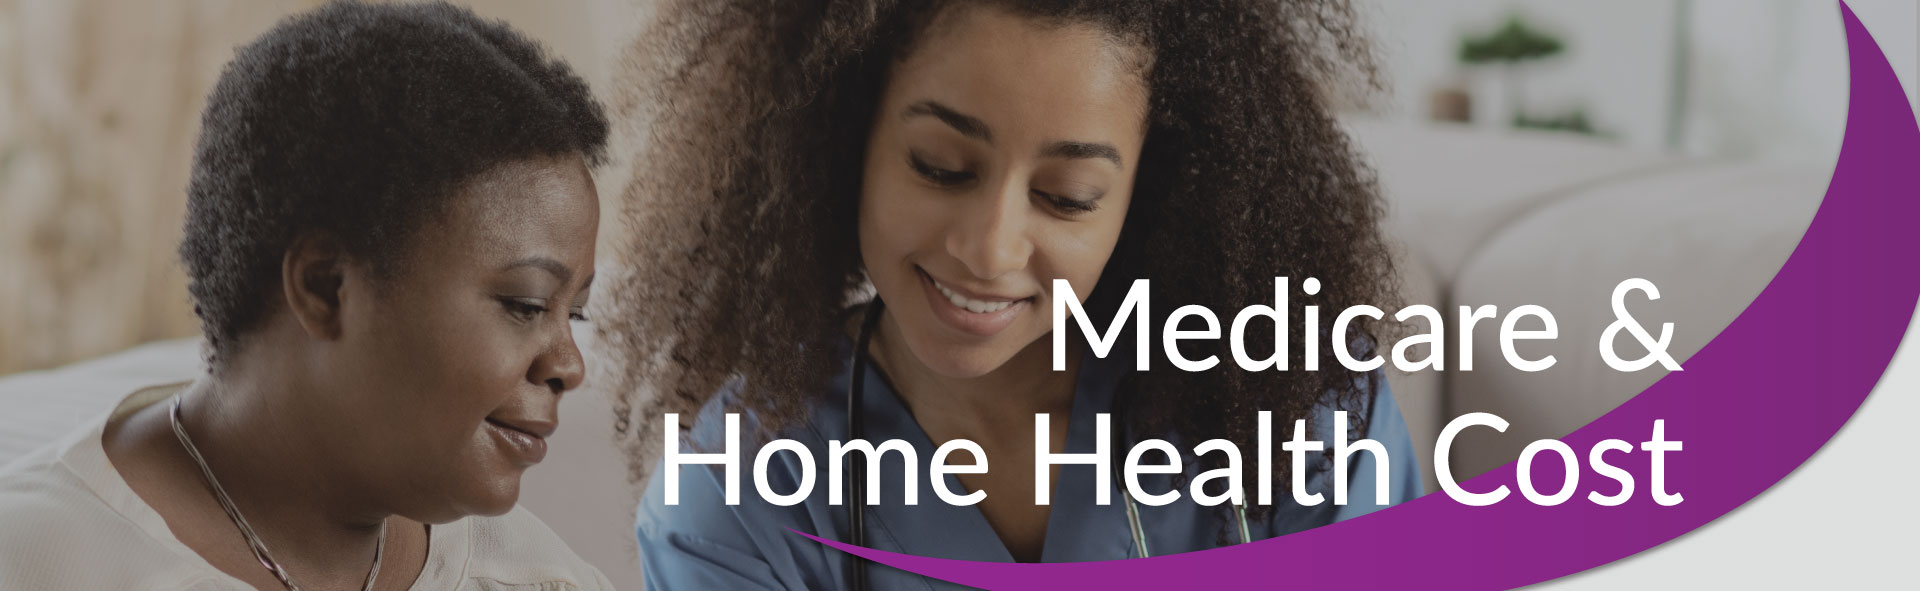 Home Health Care Costs